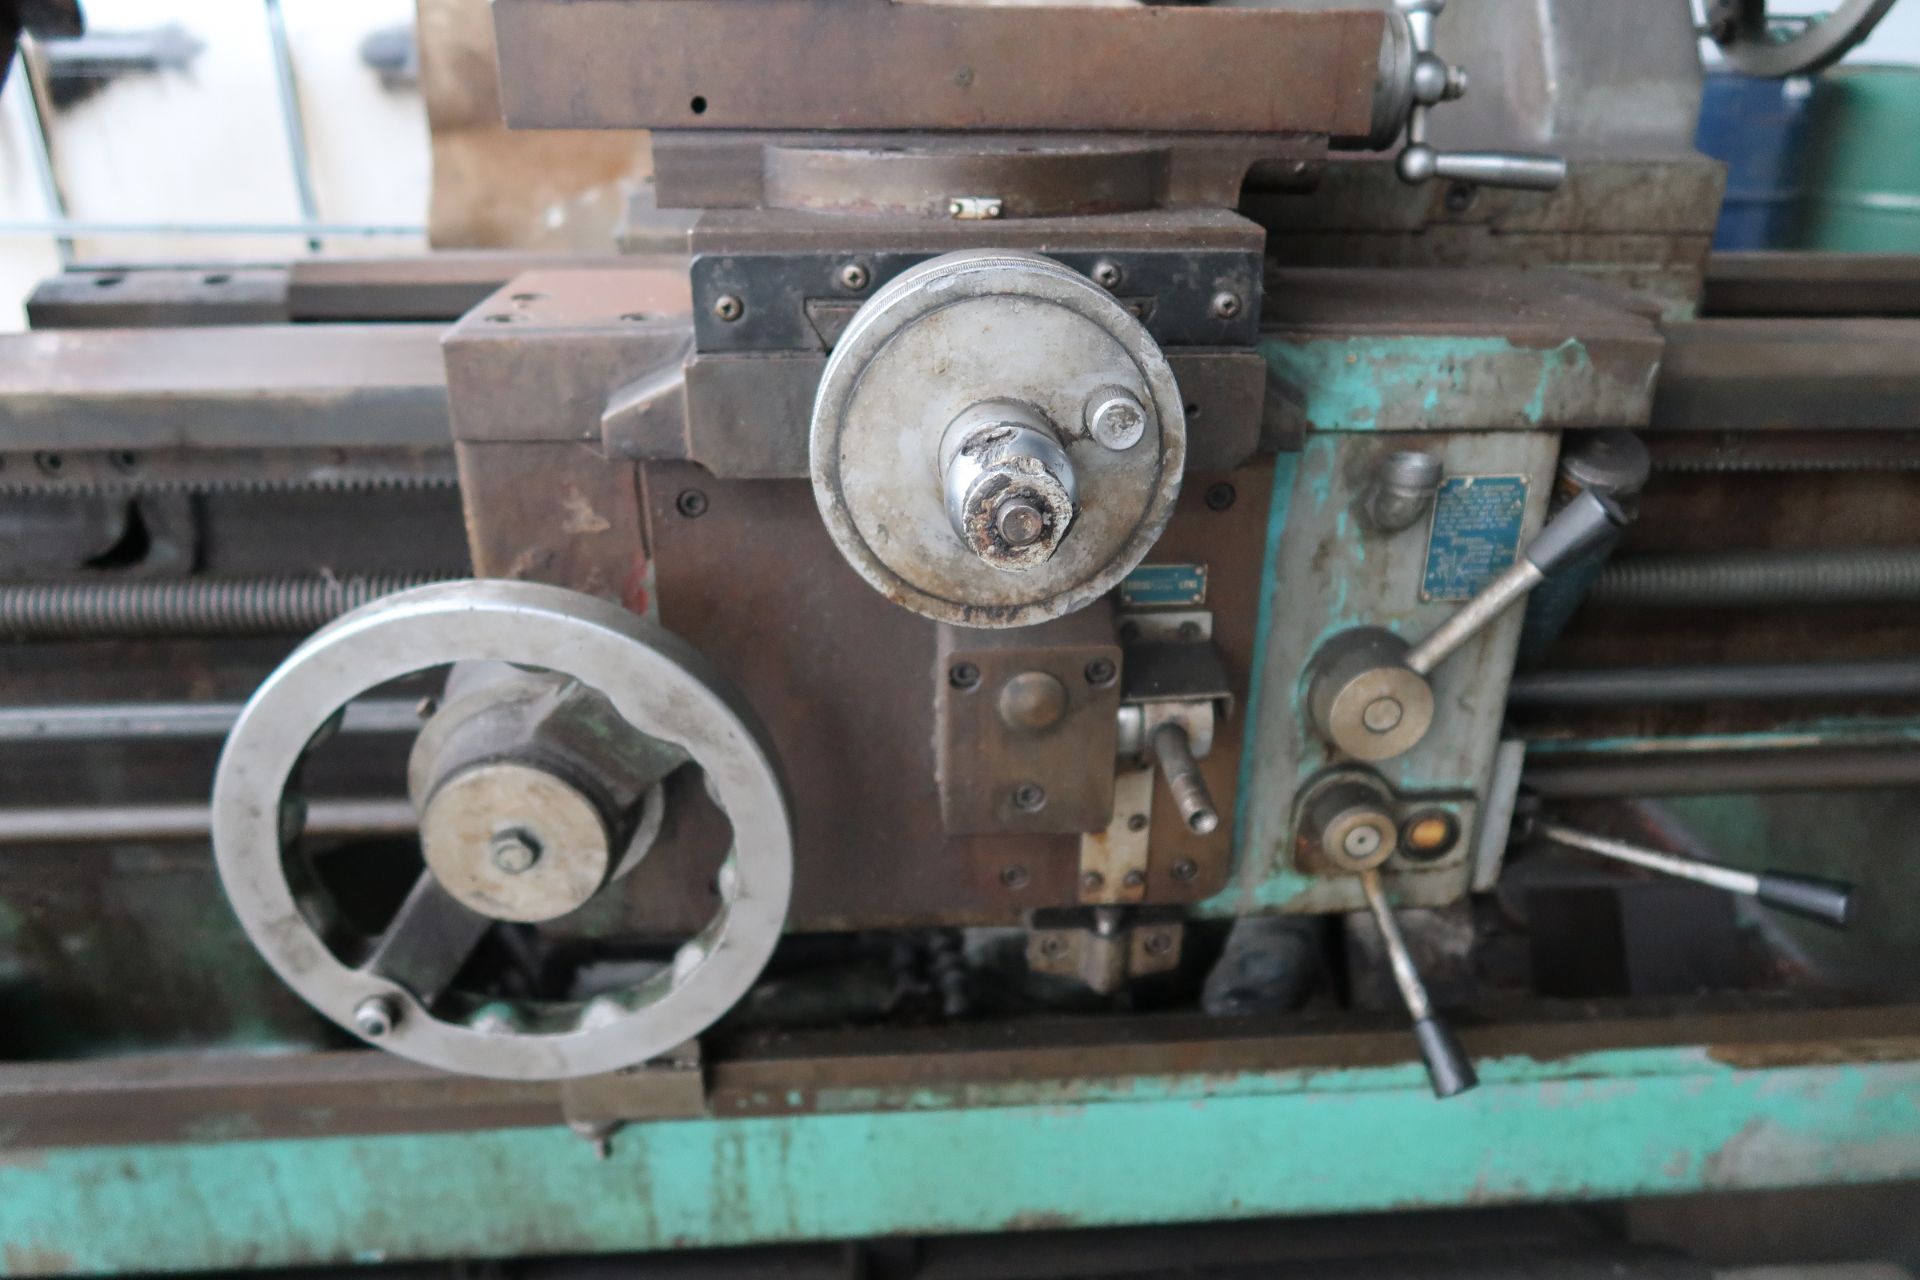 Gap Lathe 12.5" 3Jaw Chuck, Tail Stock Mod. DLA520 (SOLD AS-IS - NO WARRANTY) - Image 9 of 12